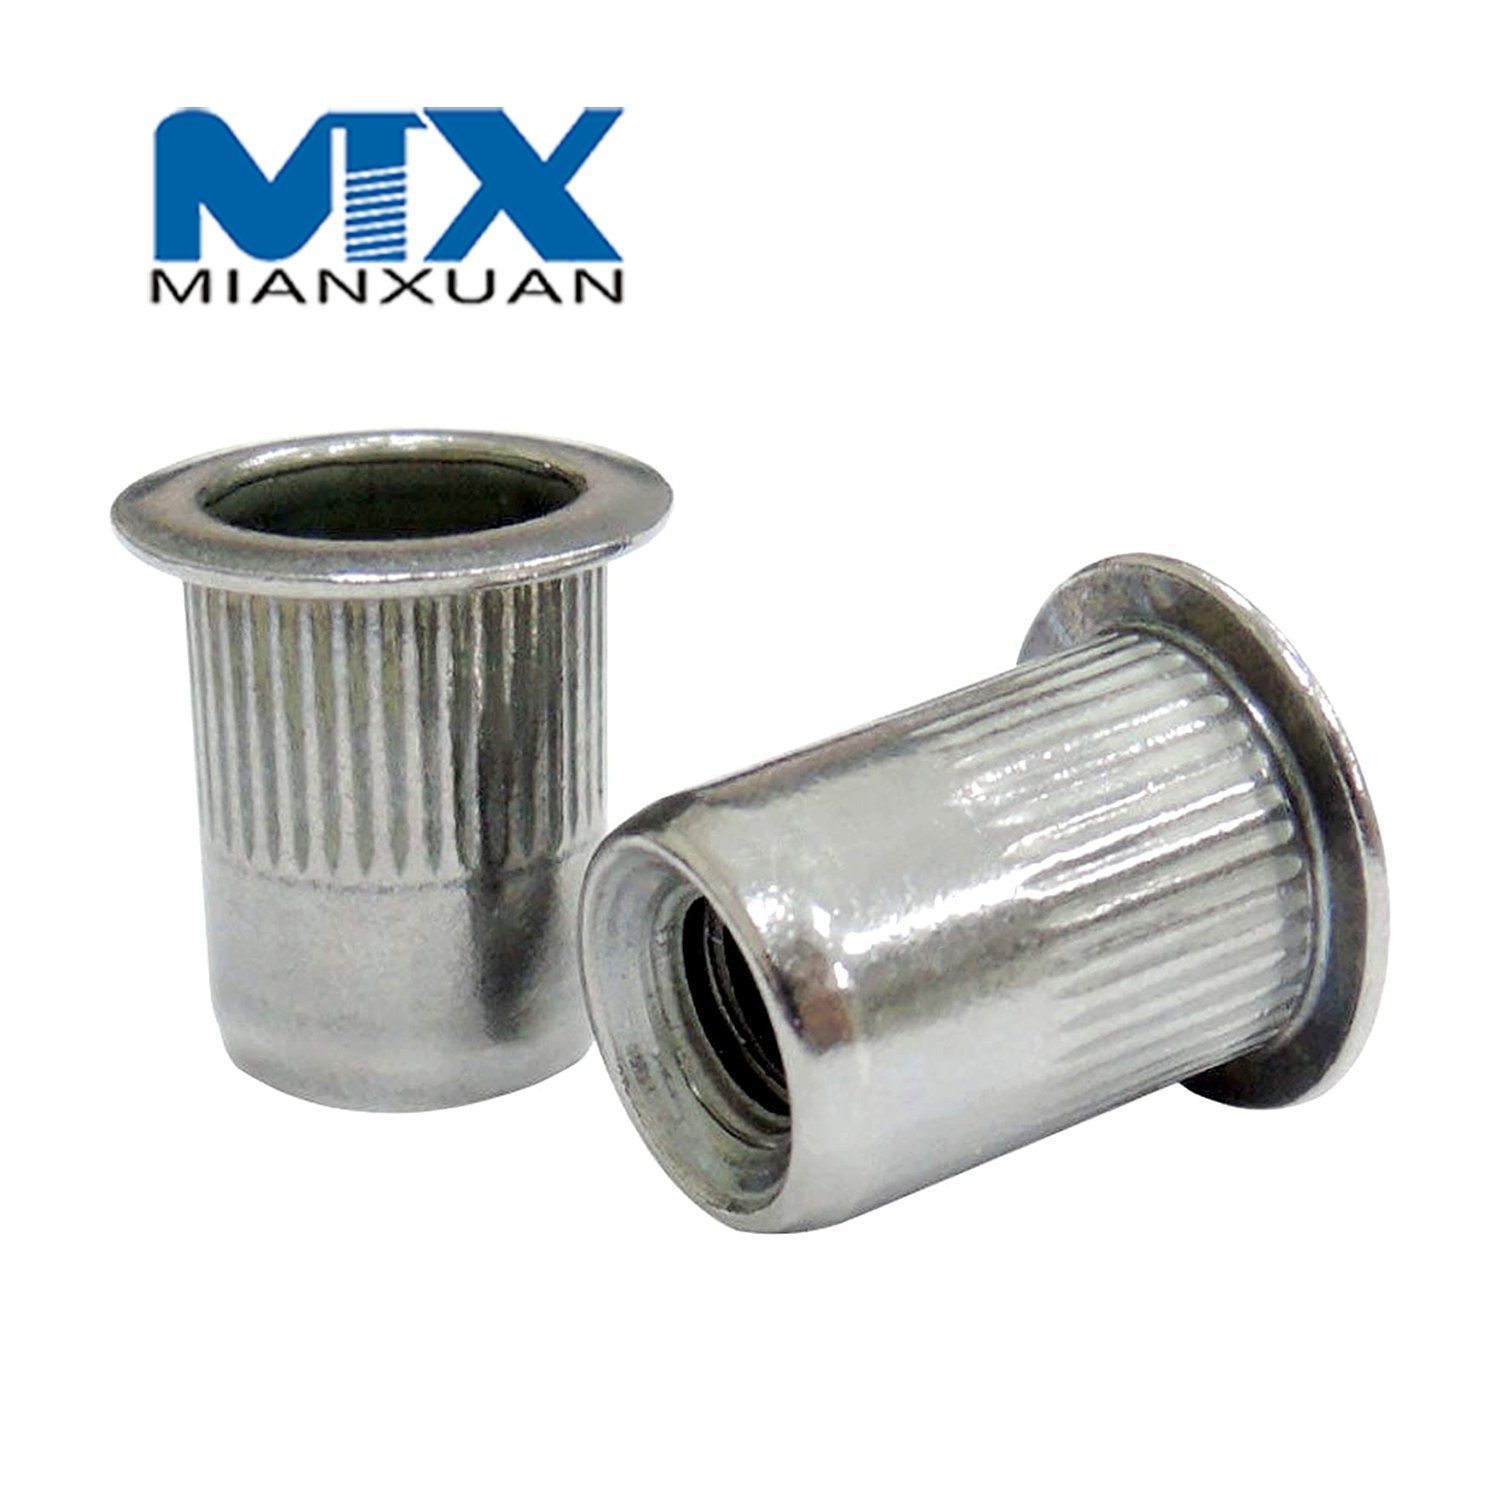 High Quality Stainless Steel Rivet Nut Supplier with Competitive Price